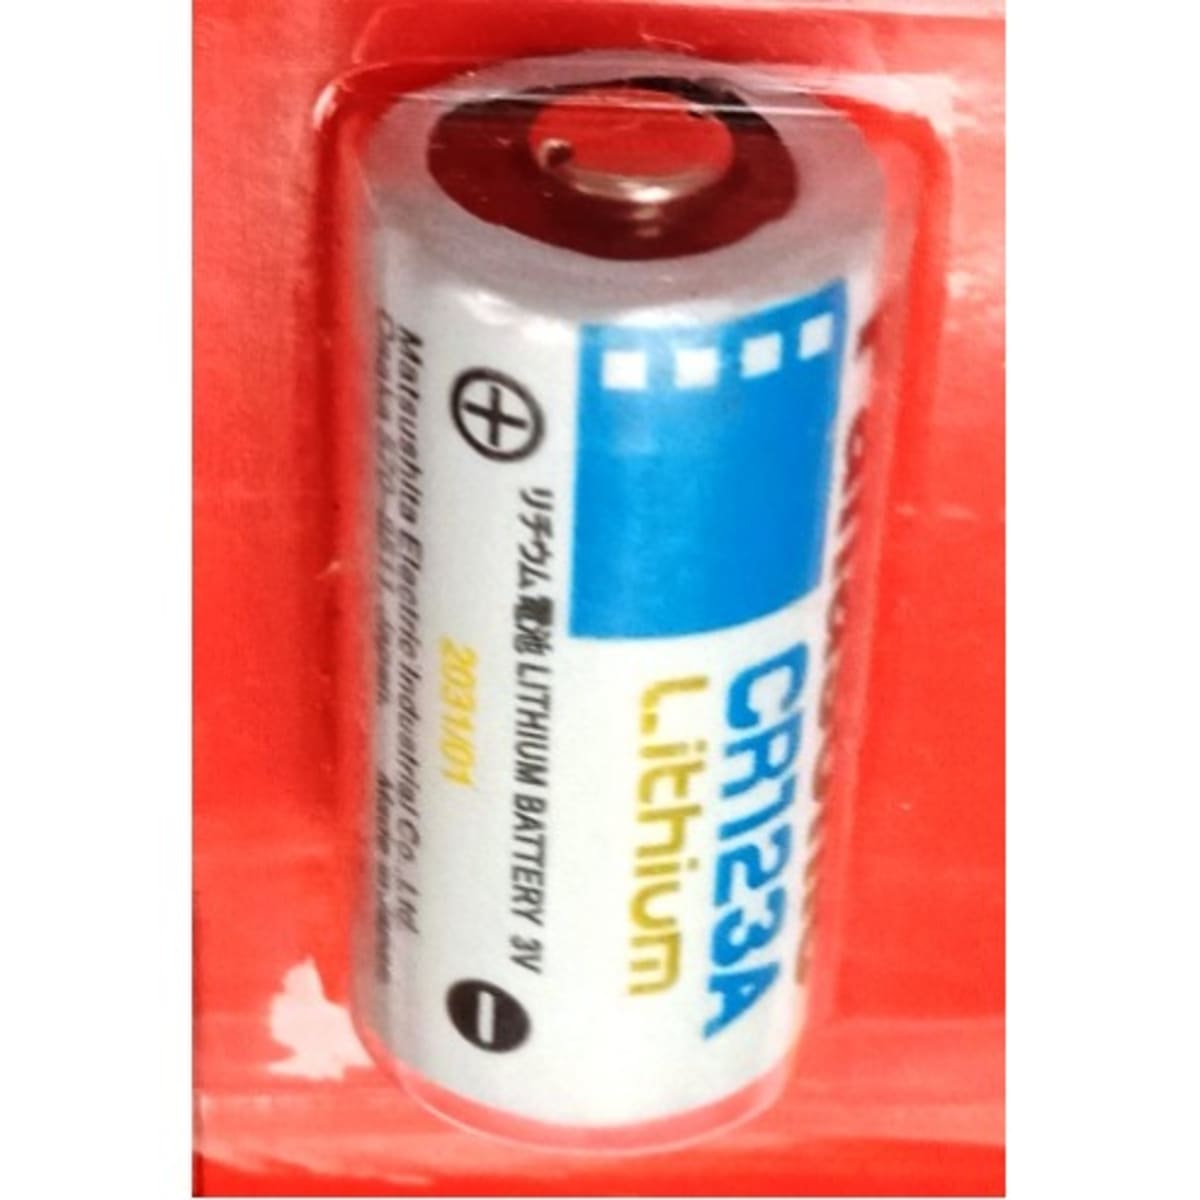 Buy Panasonic Photo Lithium Battery CR123A Online at